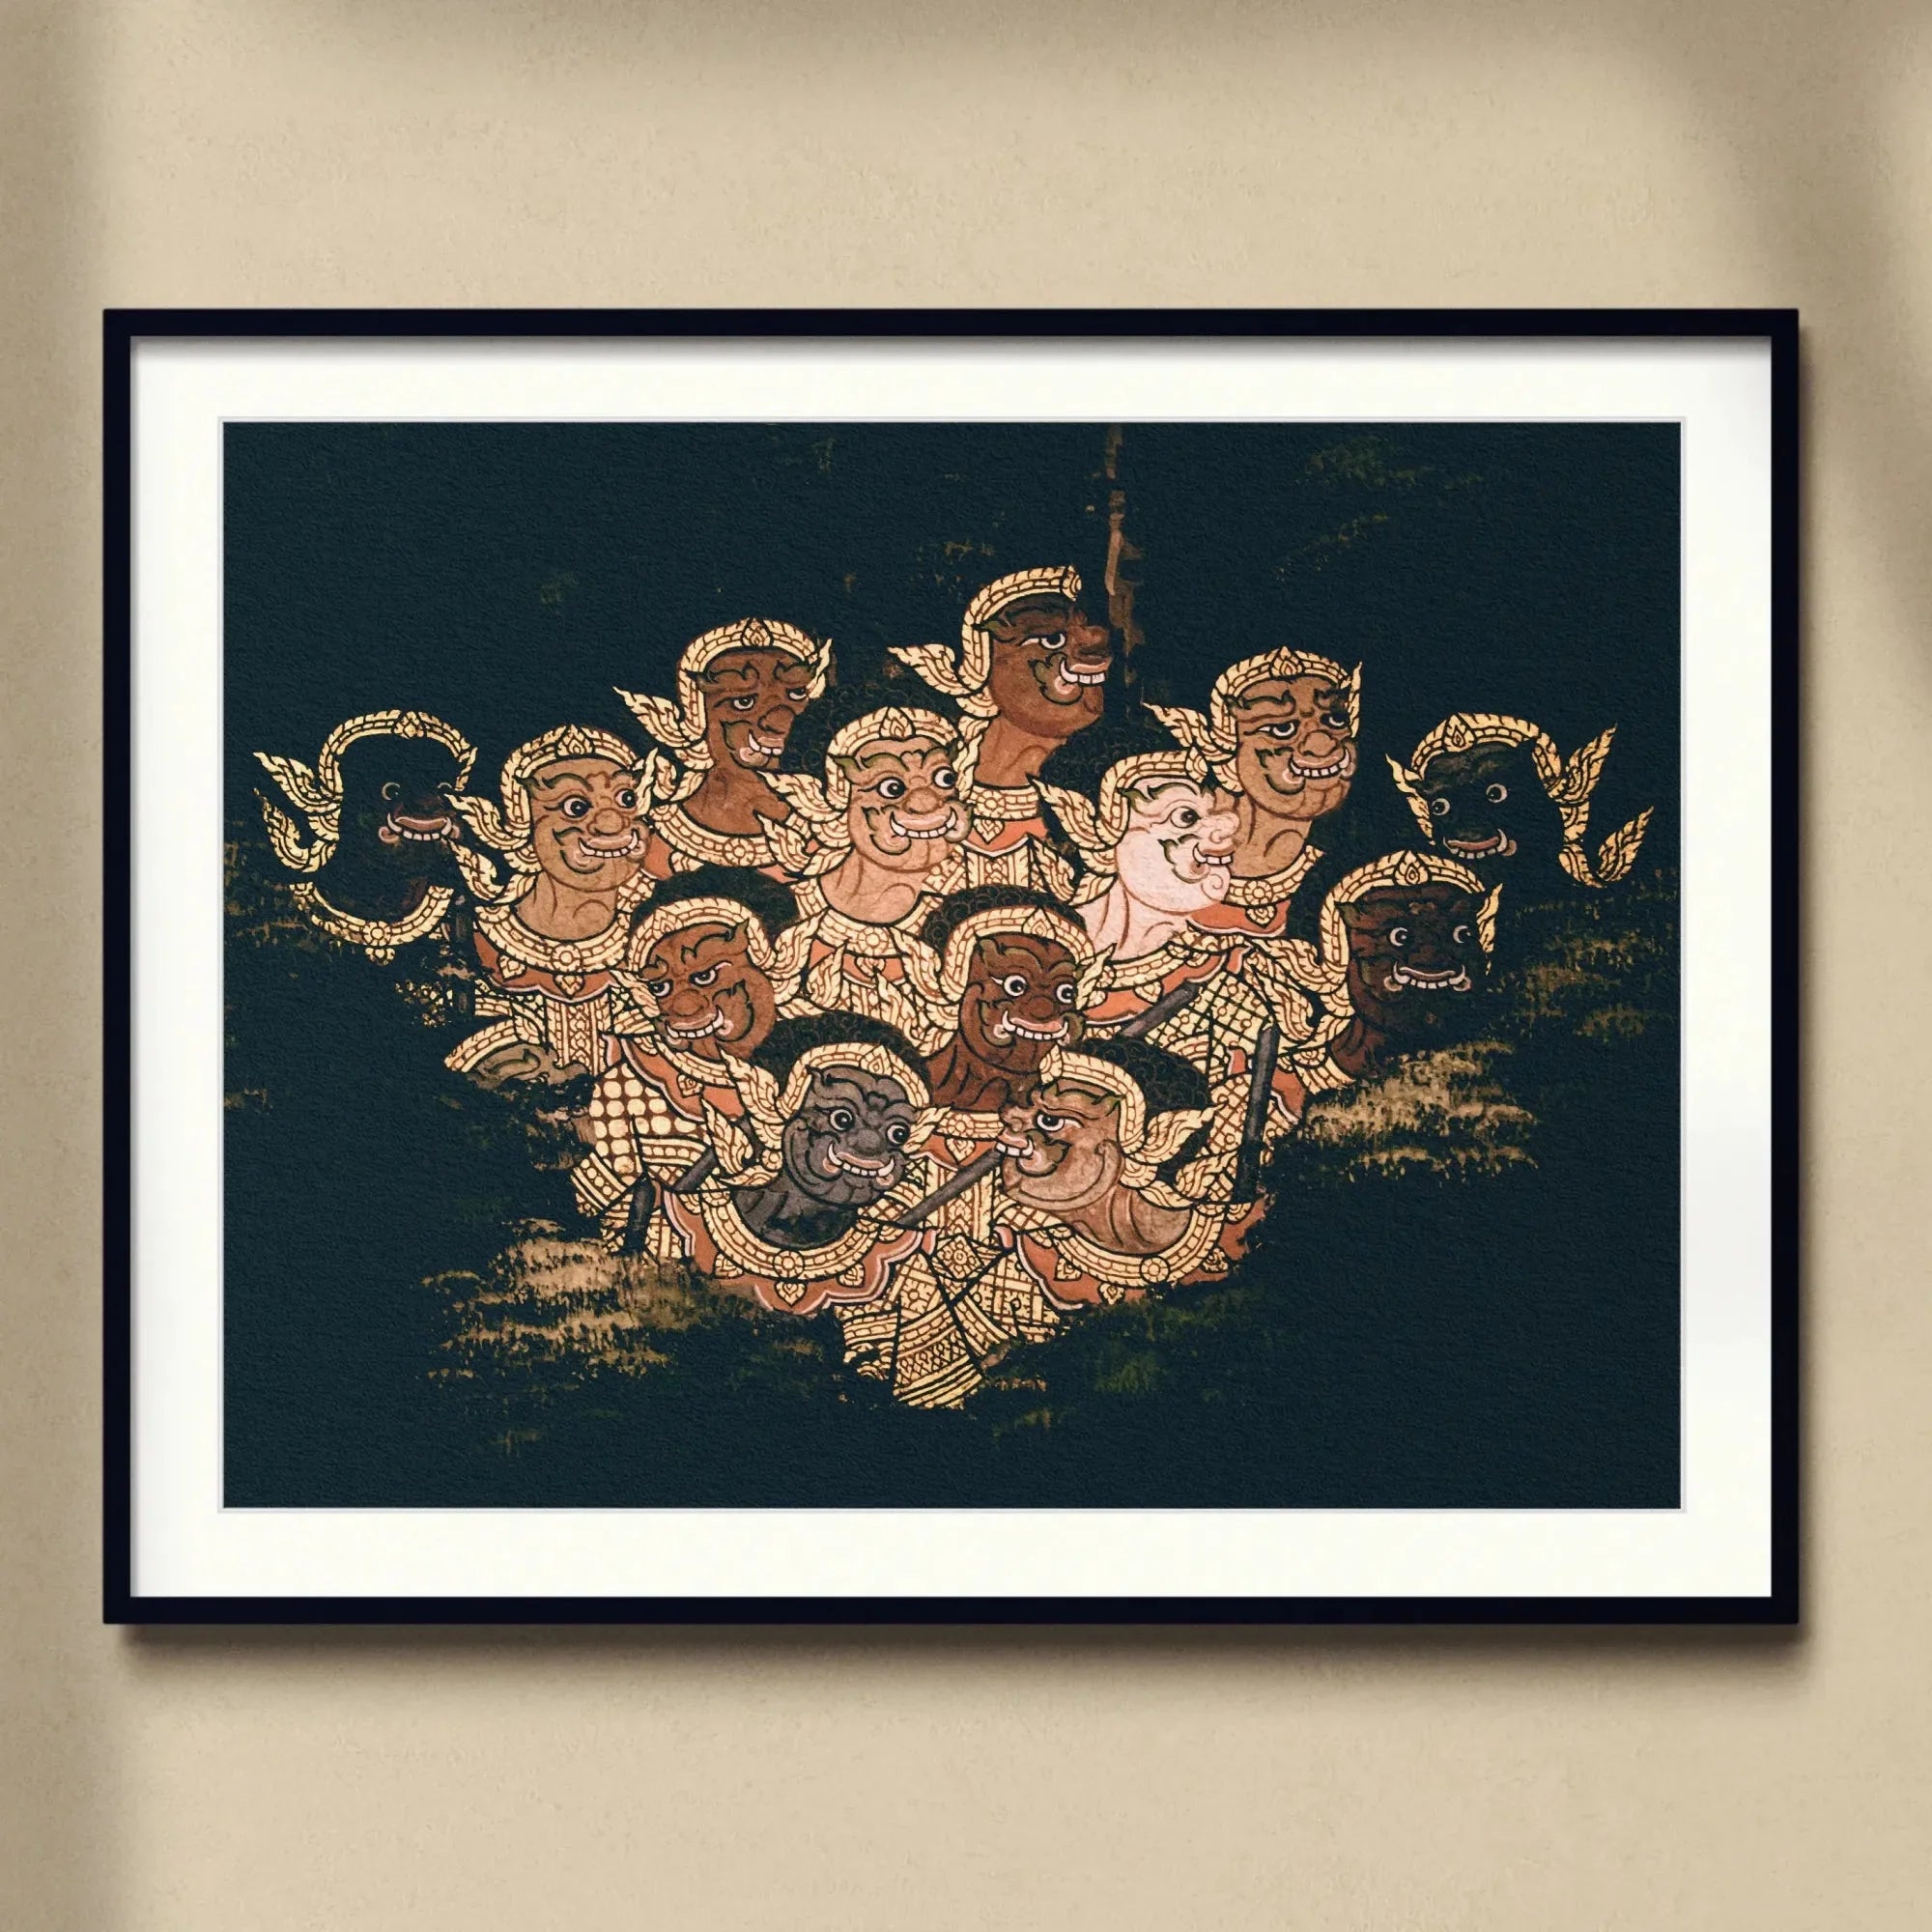 Babes In The Woods Framed & Mounted Print - Posters Prints & Visual Artwork - Aesthetic Art